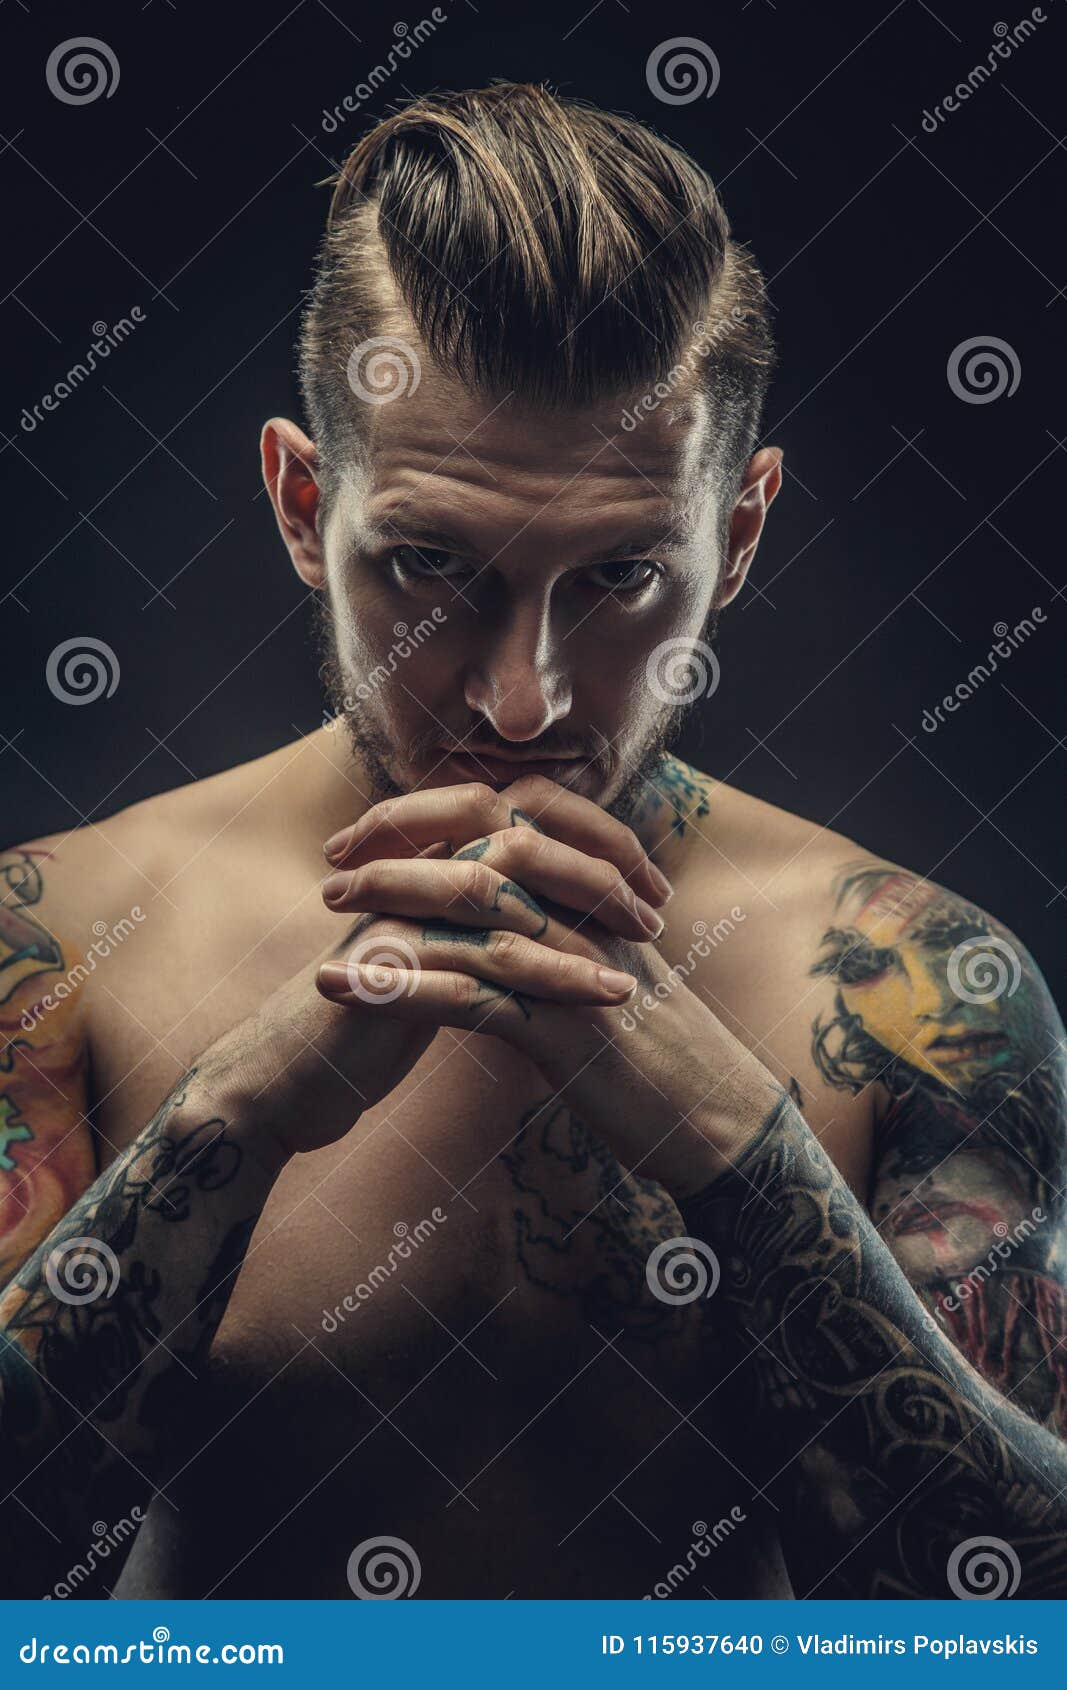 Portrait Uf Shirtless Male with Tattoo on His Arms. Stock Photo - Image of scary, casual: 115937640